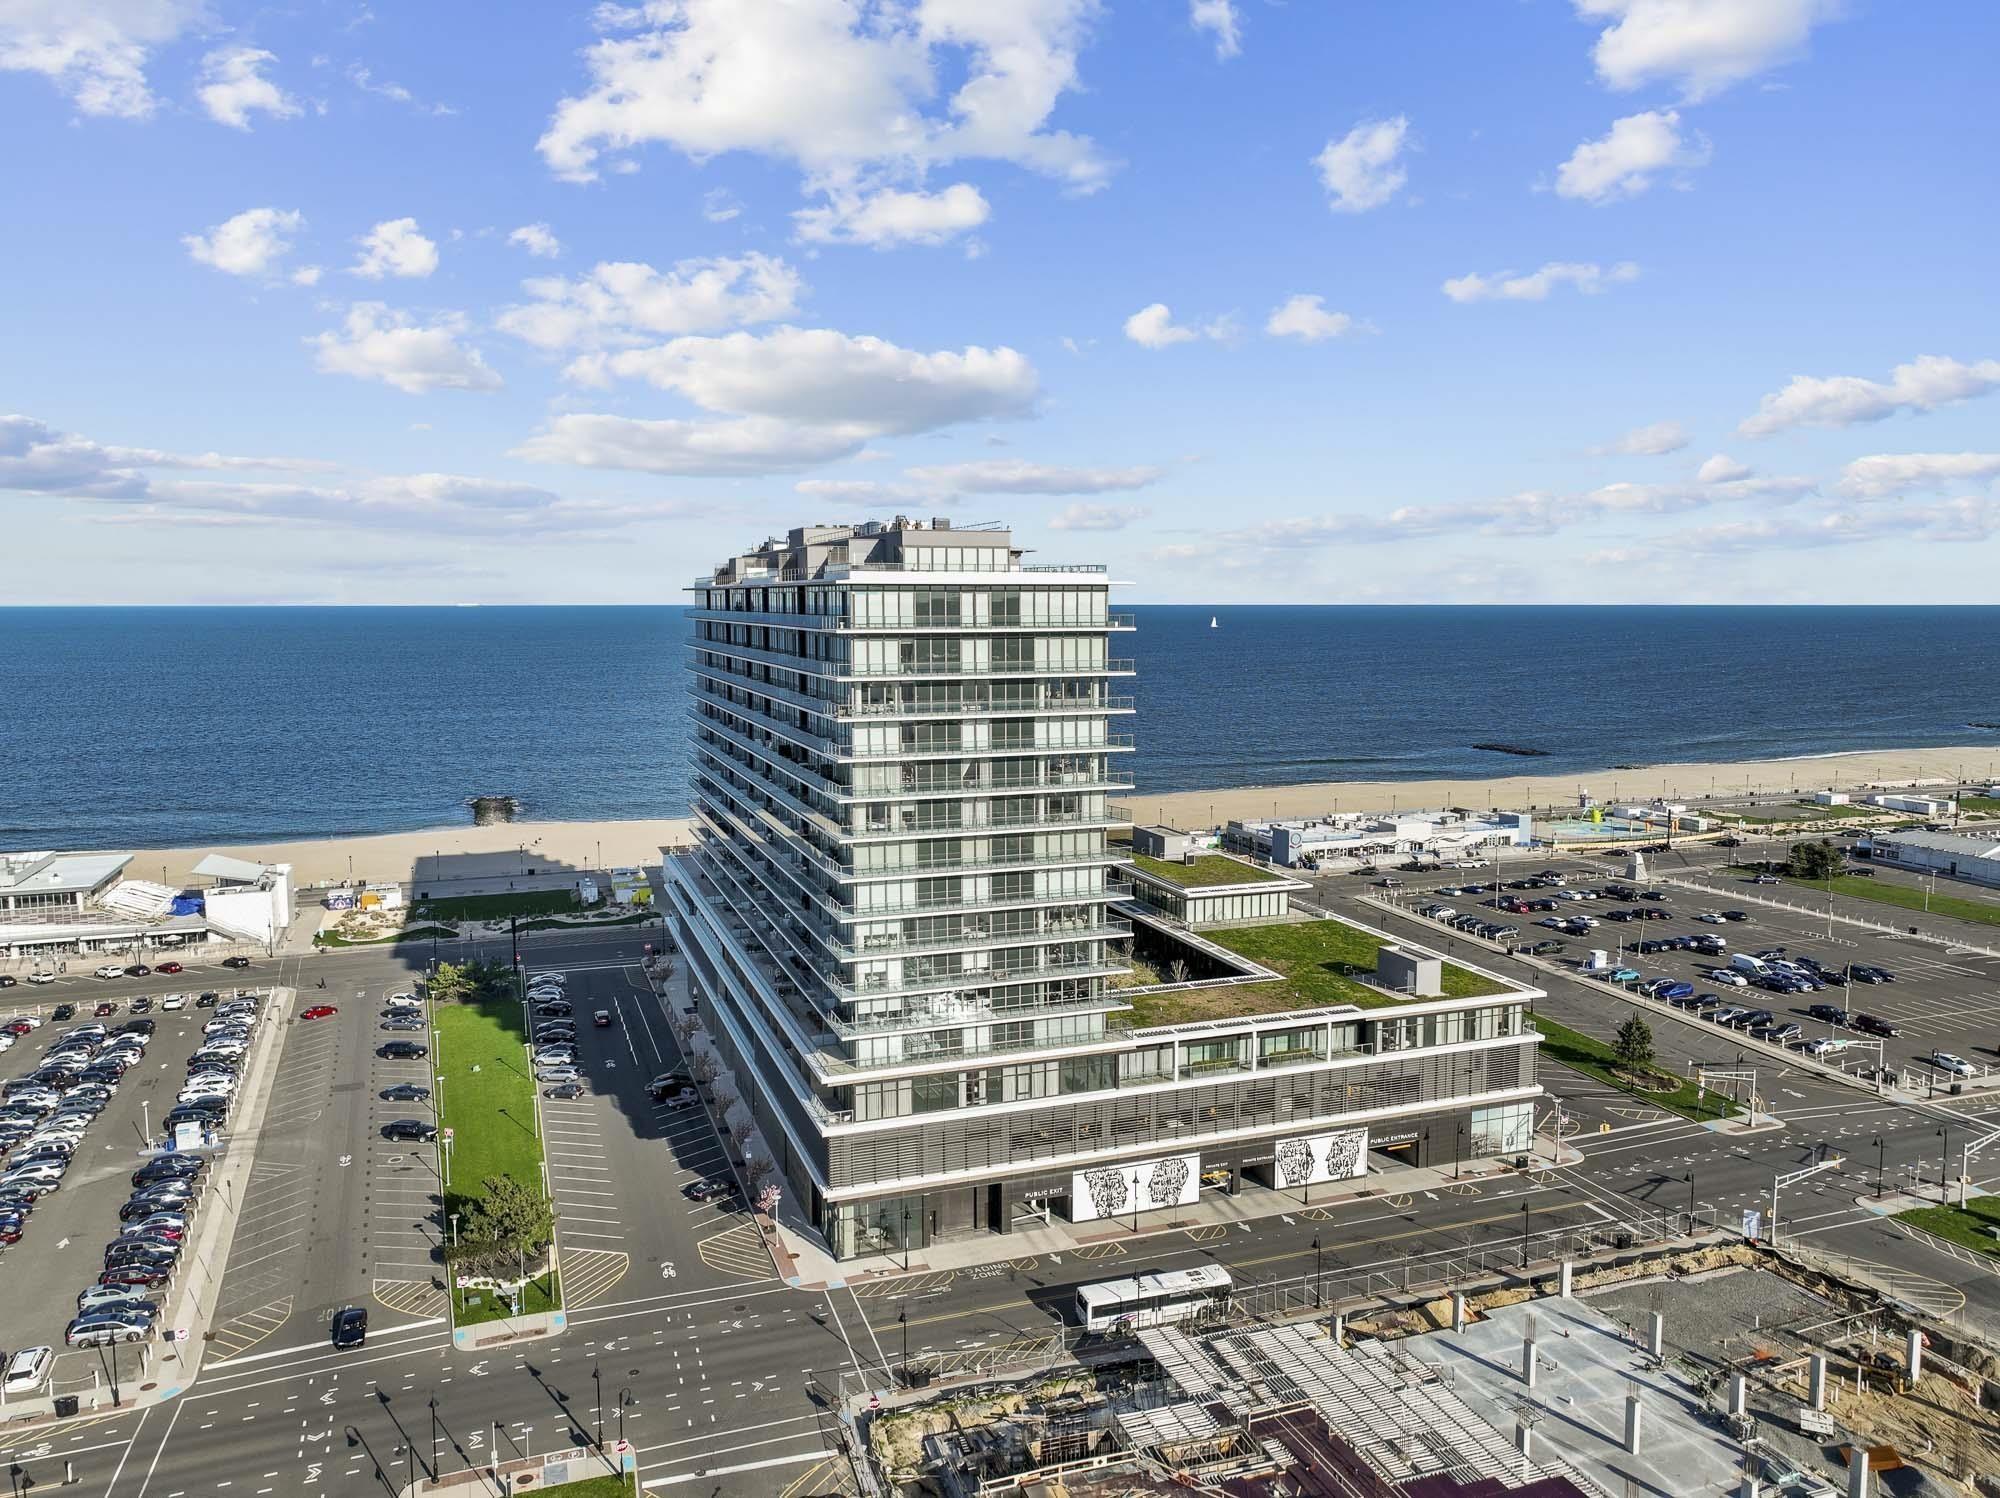 Property Image for 1101 Ocean Ave 902